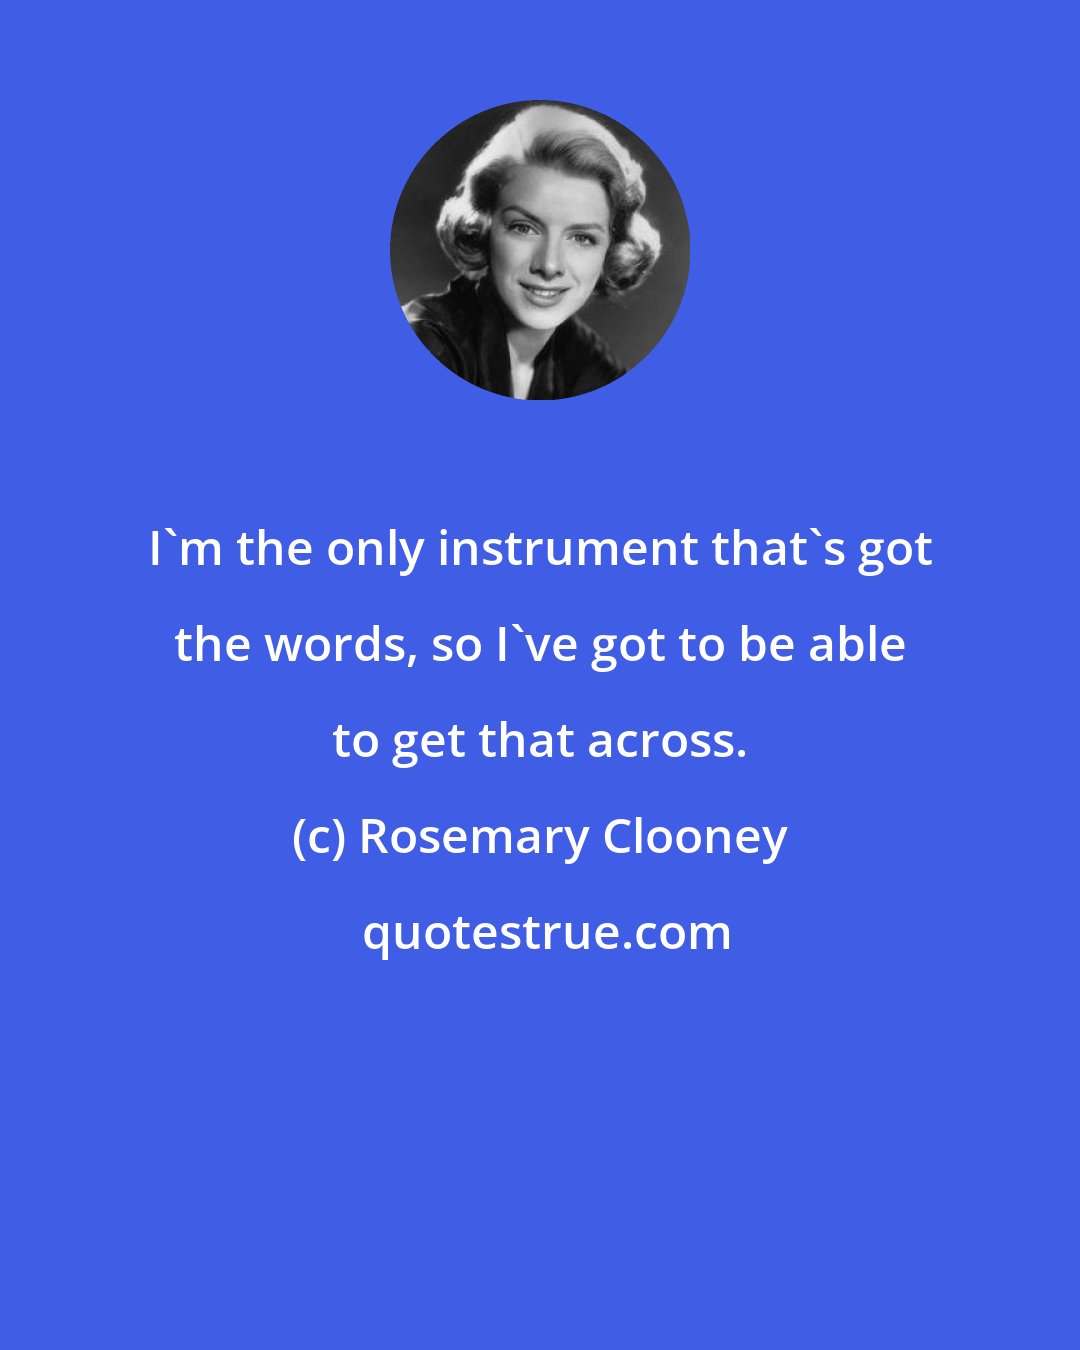 Rosemary Clooney: I'm the only instrument that's got the words, so I've got to be able to get that across.